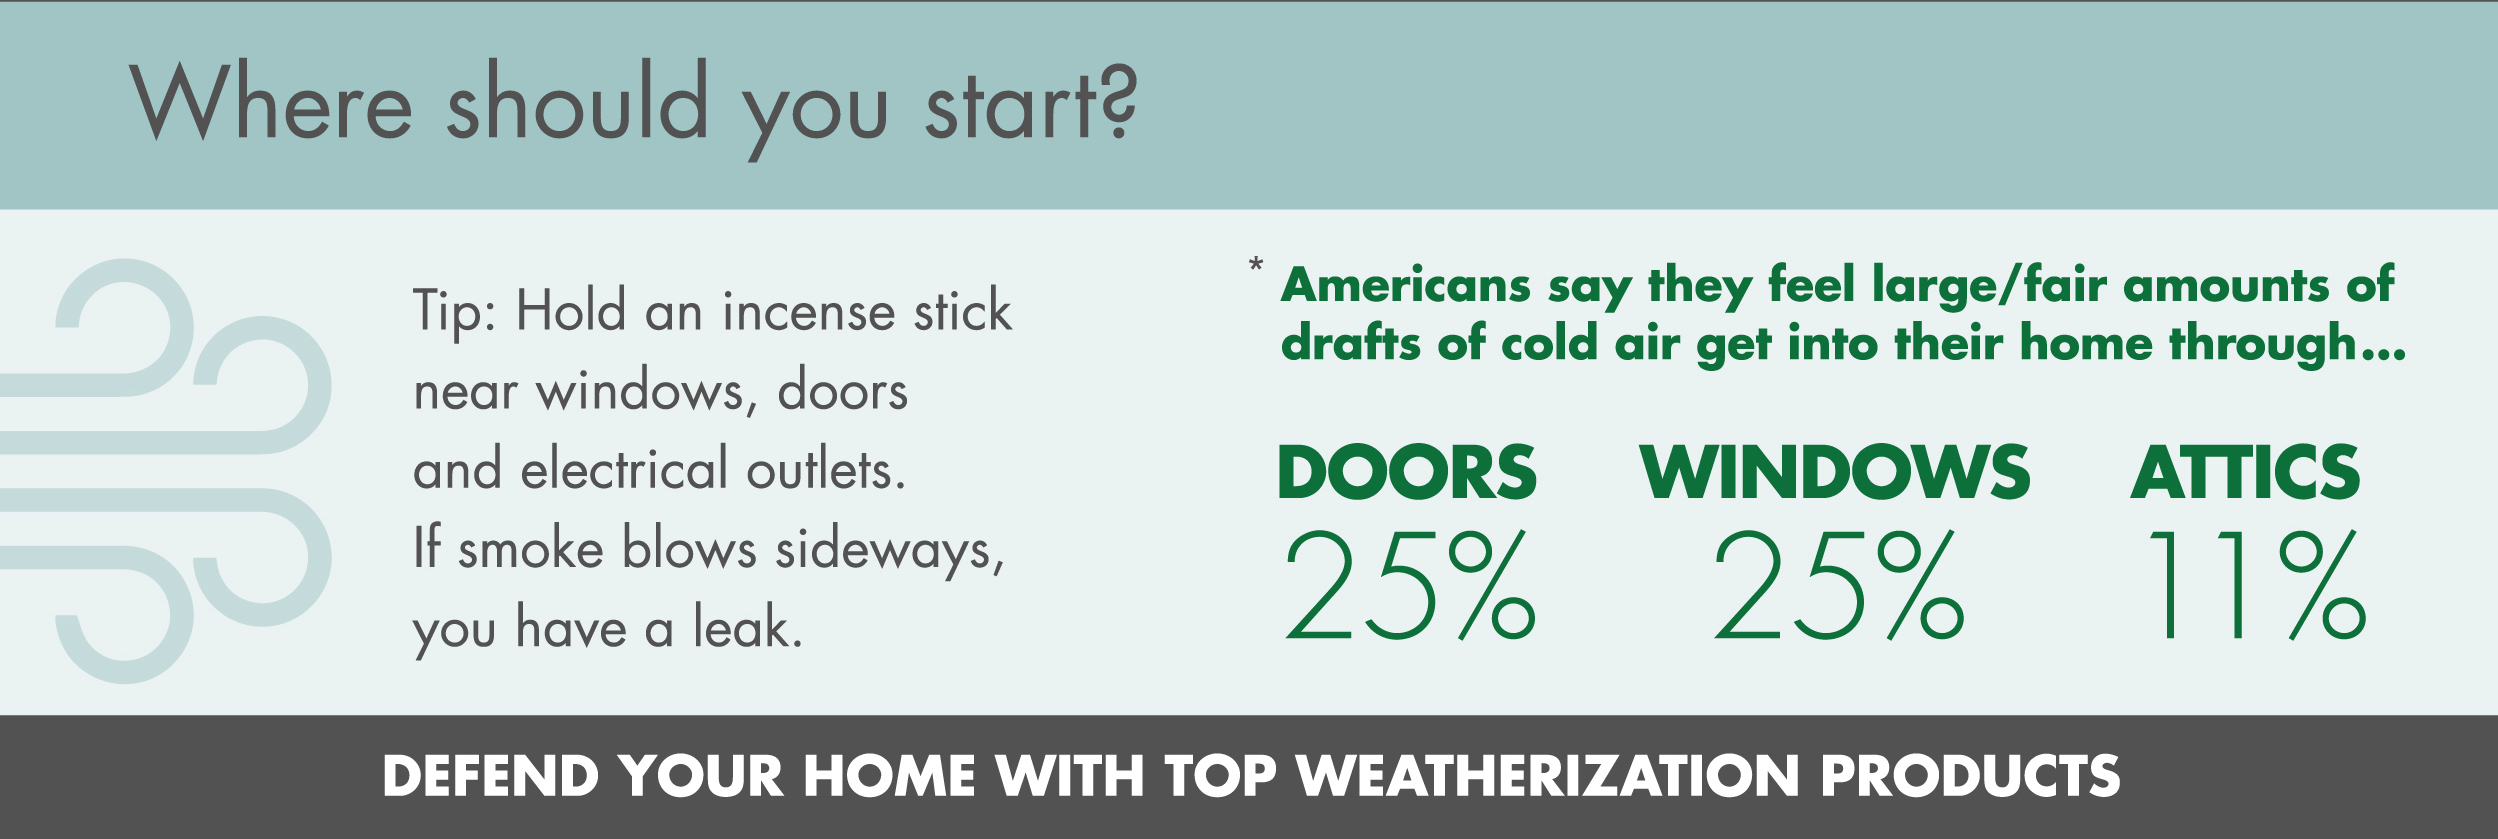 Infographic that gives the percentages of where Americans feel drafts in their homes are coming from